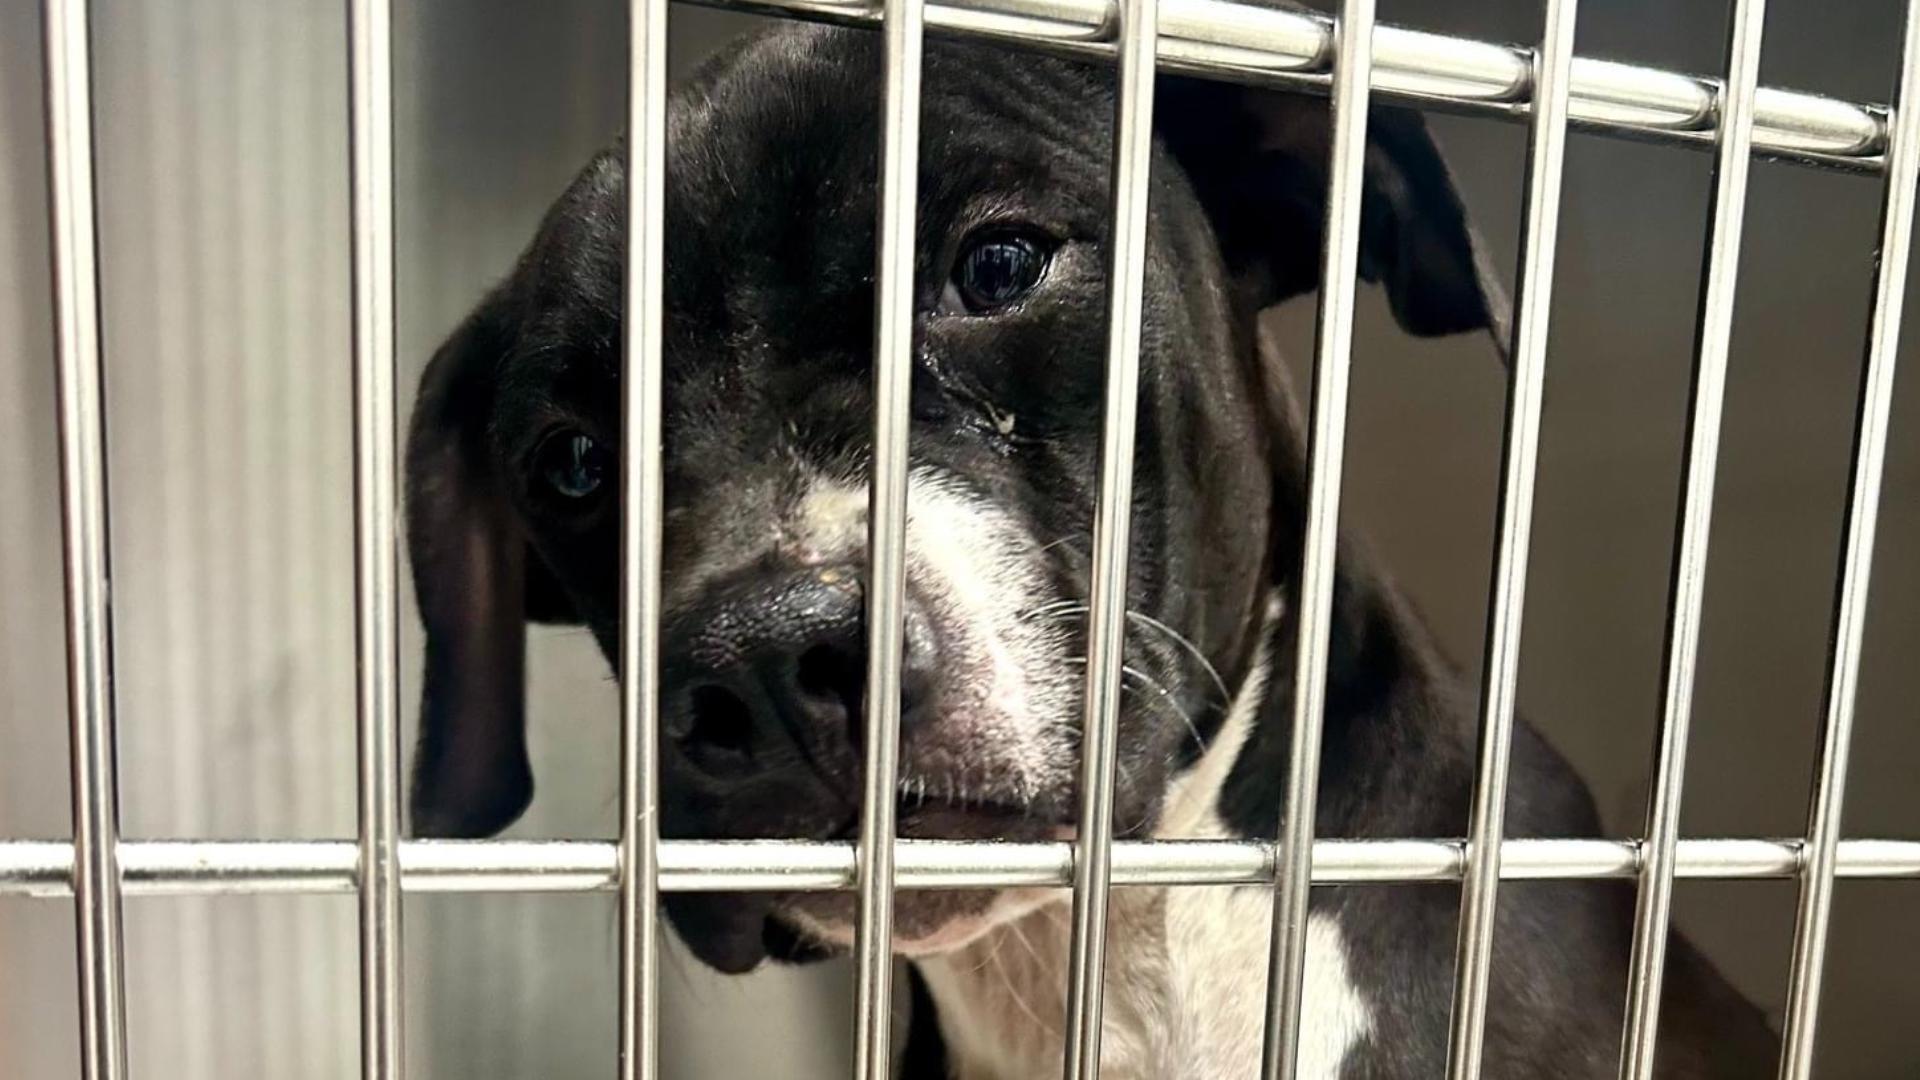 Georgia is euthanizing more animals than most states in the country. A new coalition is working to radically change that.